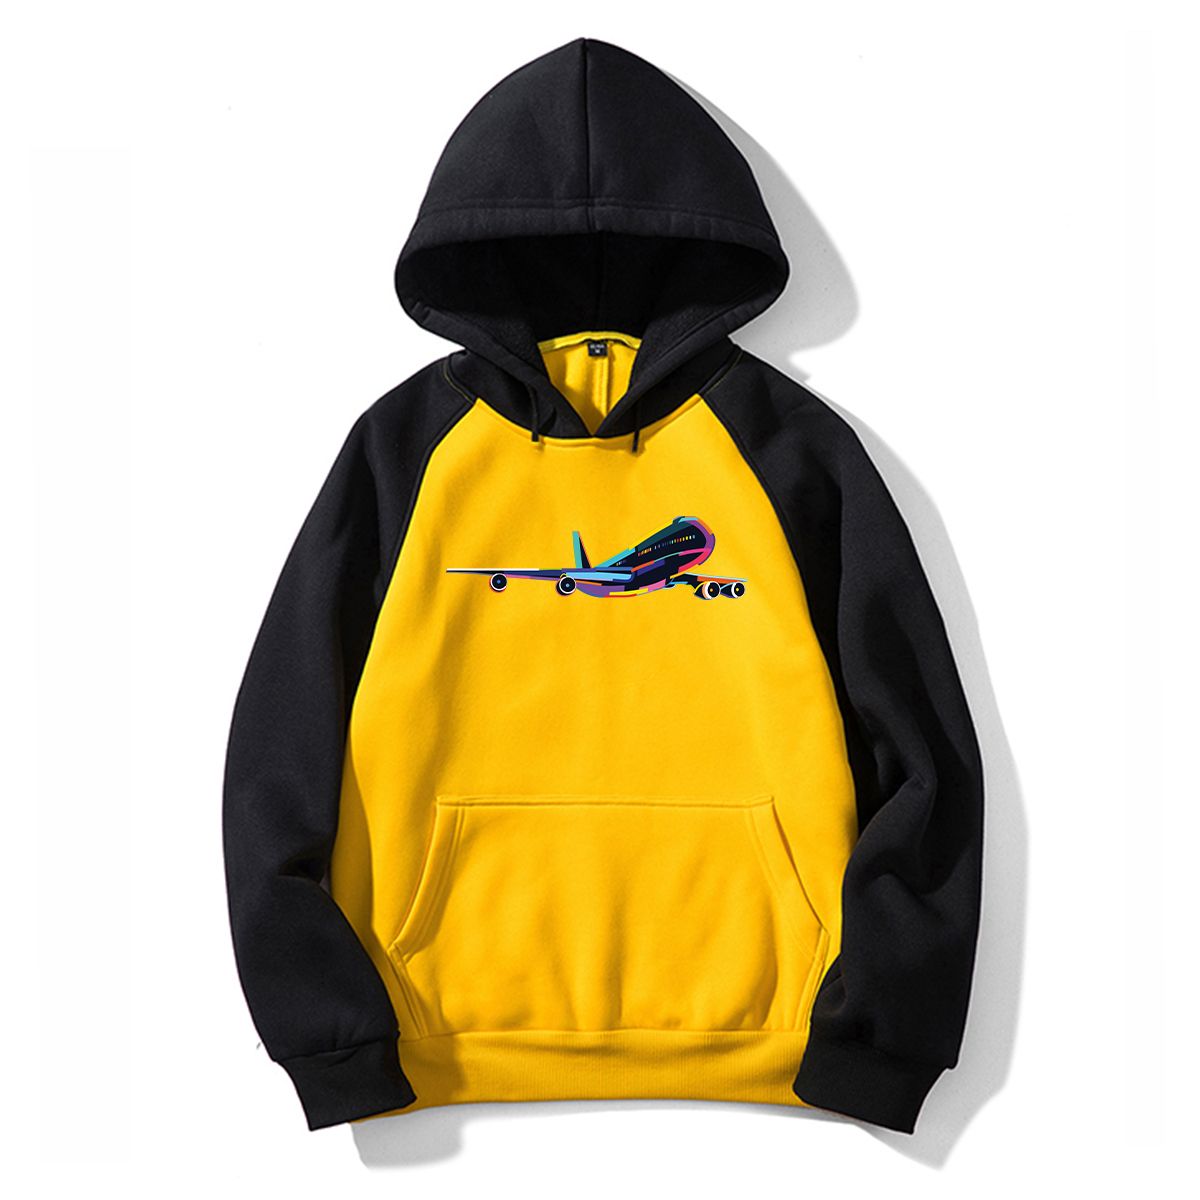 Multicolor Airplane Designed Colourful Hoodies